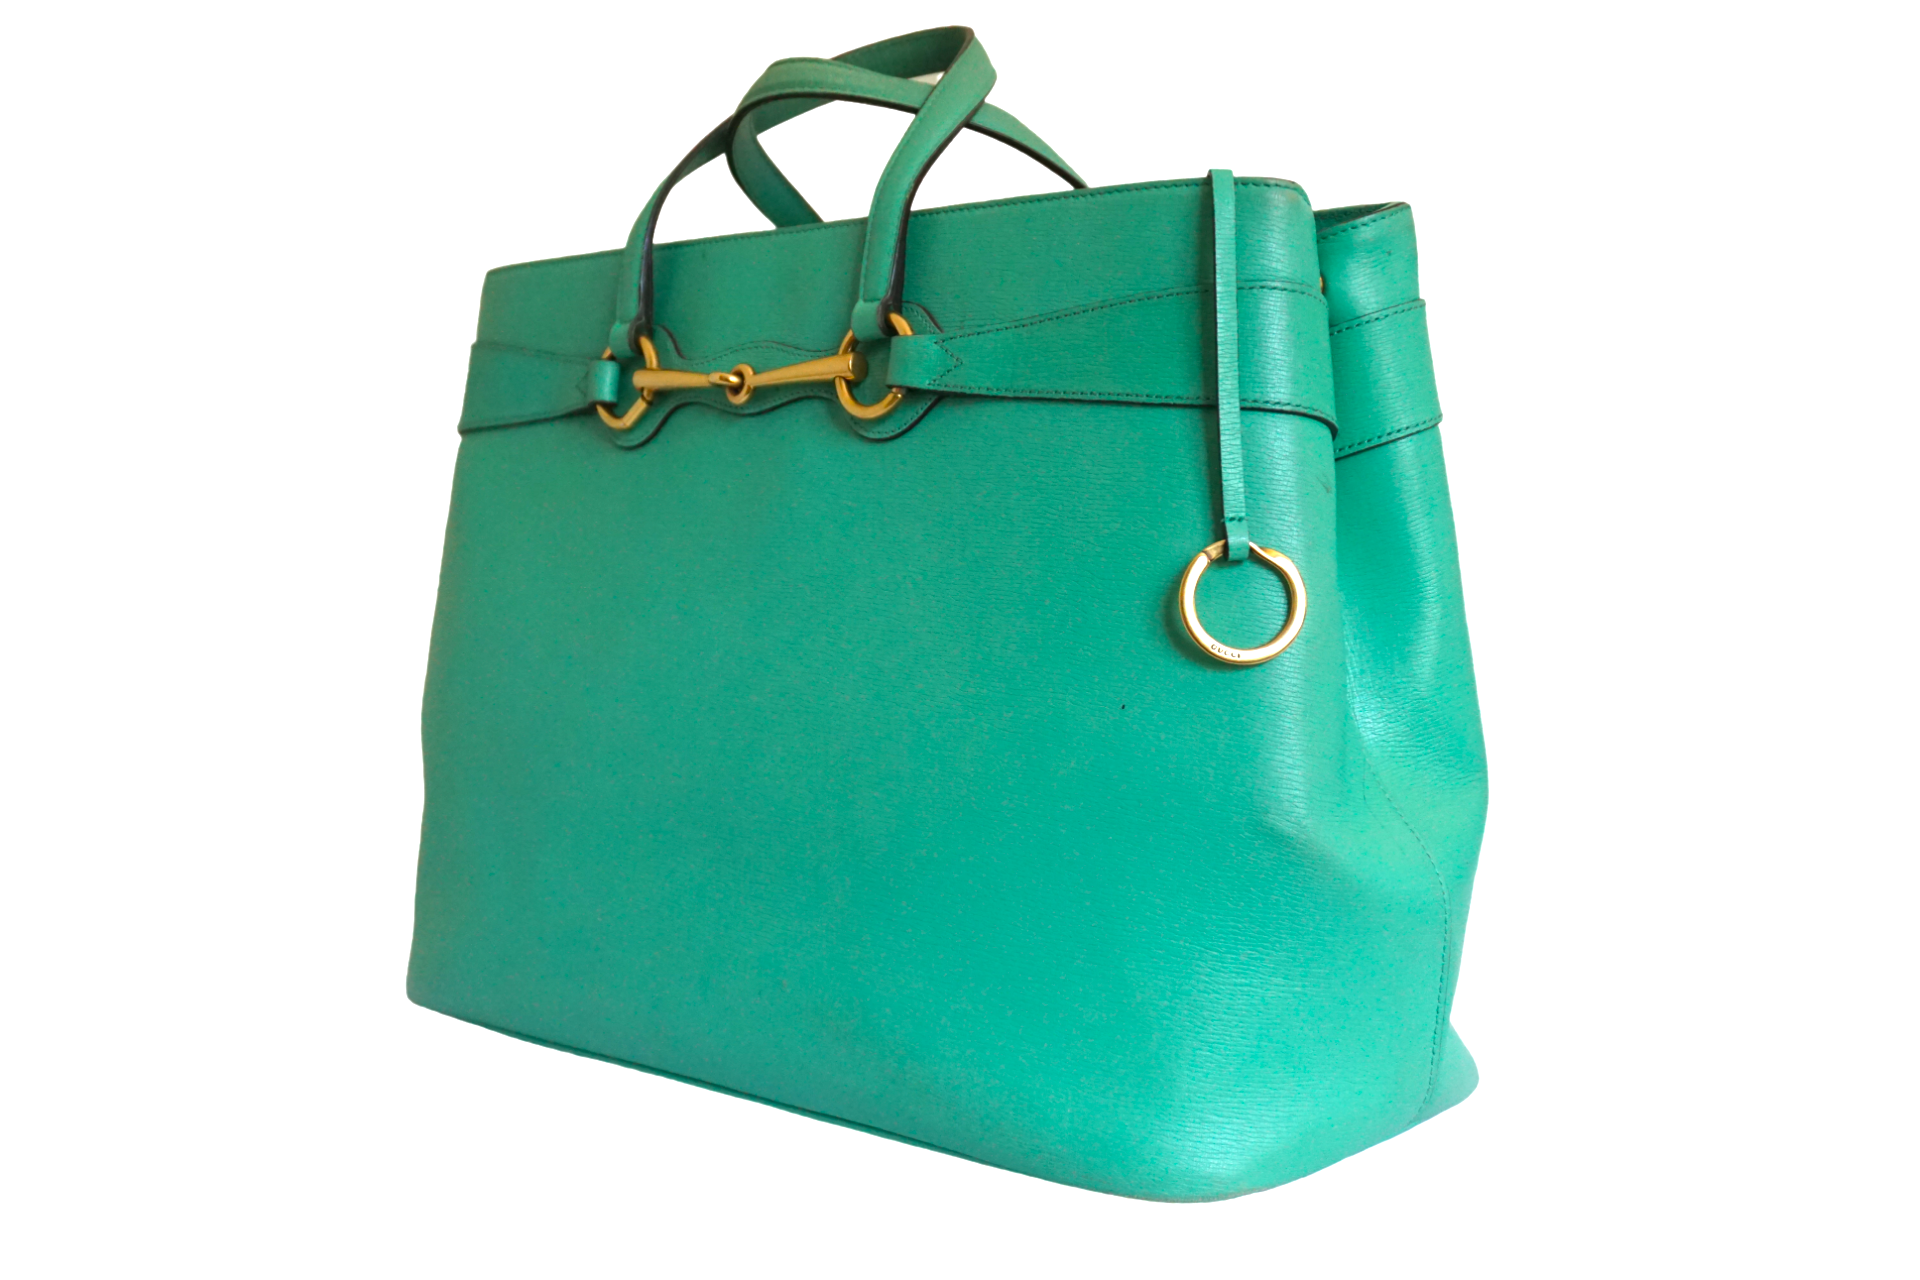 Gucci Bright Bit Leather Tote Green Large